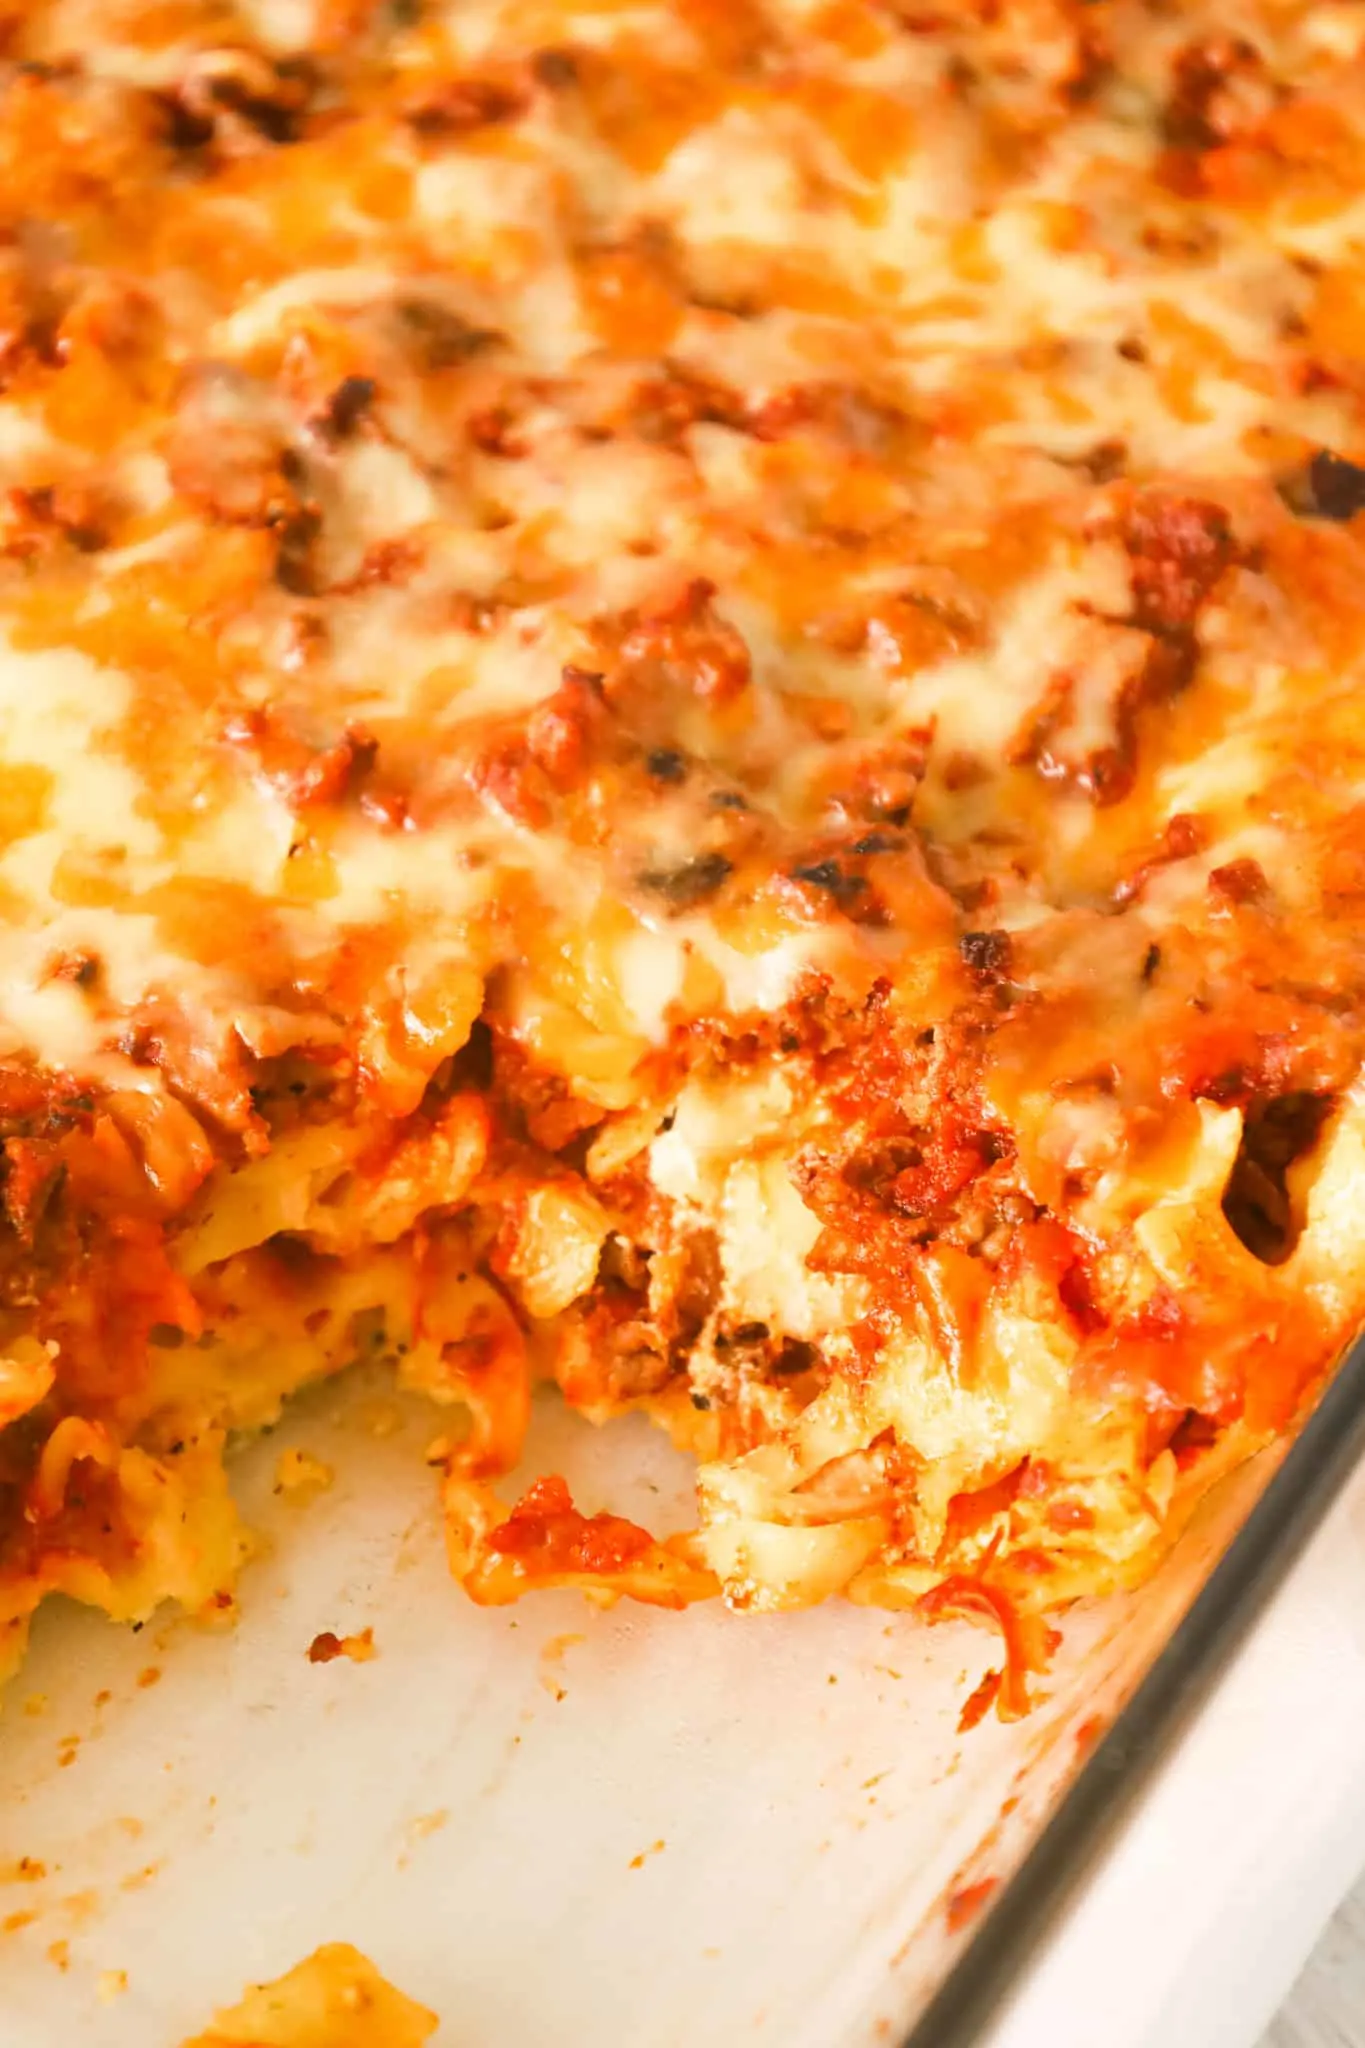 Sour Cream Noodle Bake is a hearty casserole loaded with ground beef, egg noodles, ricotta cheese, sour cream, marinara and shredded cheddar and mozzarella.